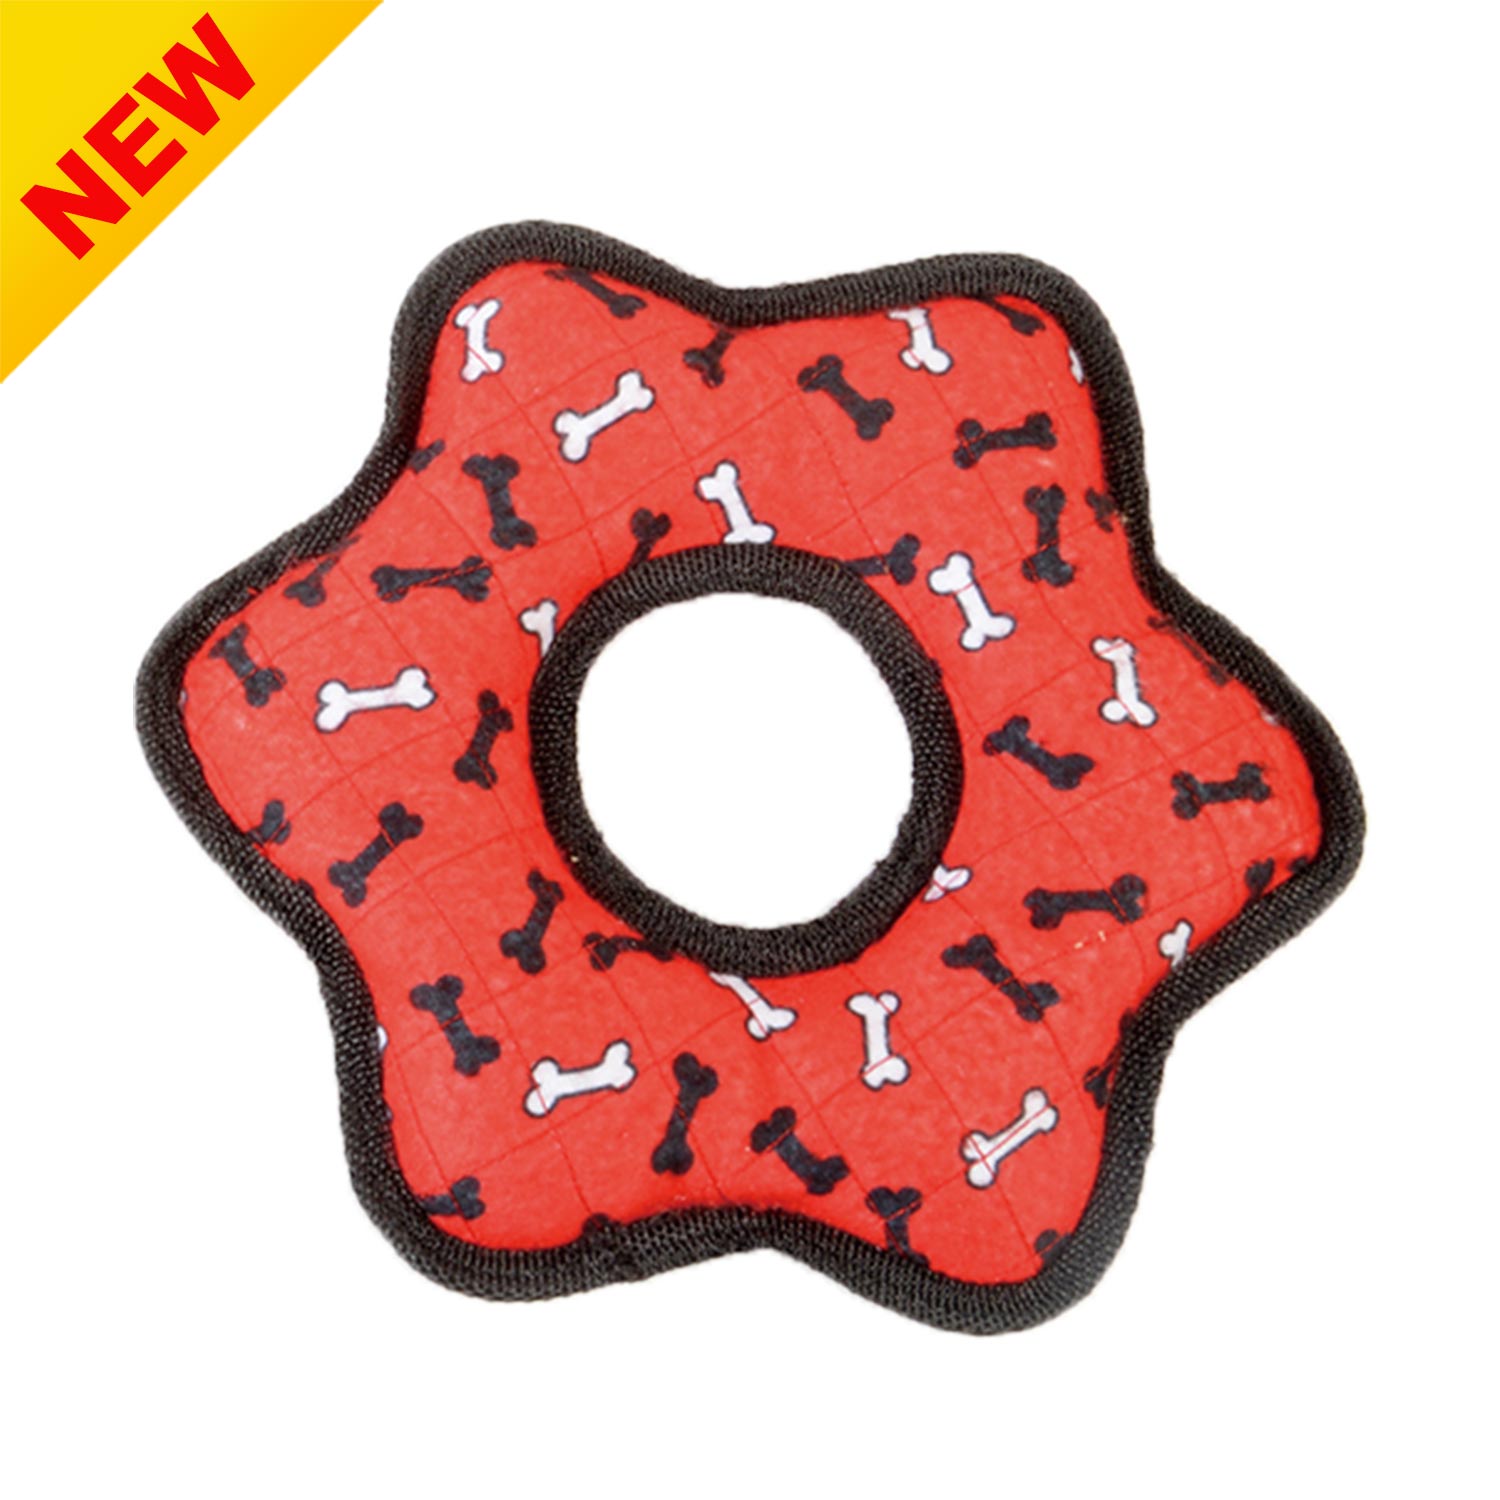 Stuffed Squeaky Gear Ring Pet Dog Toy